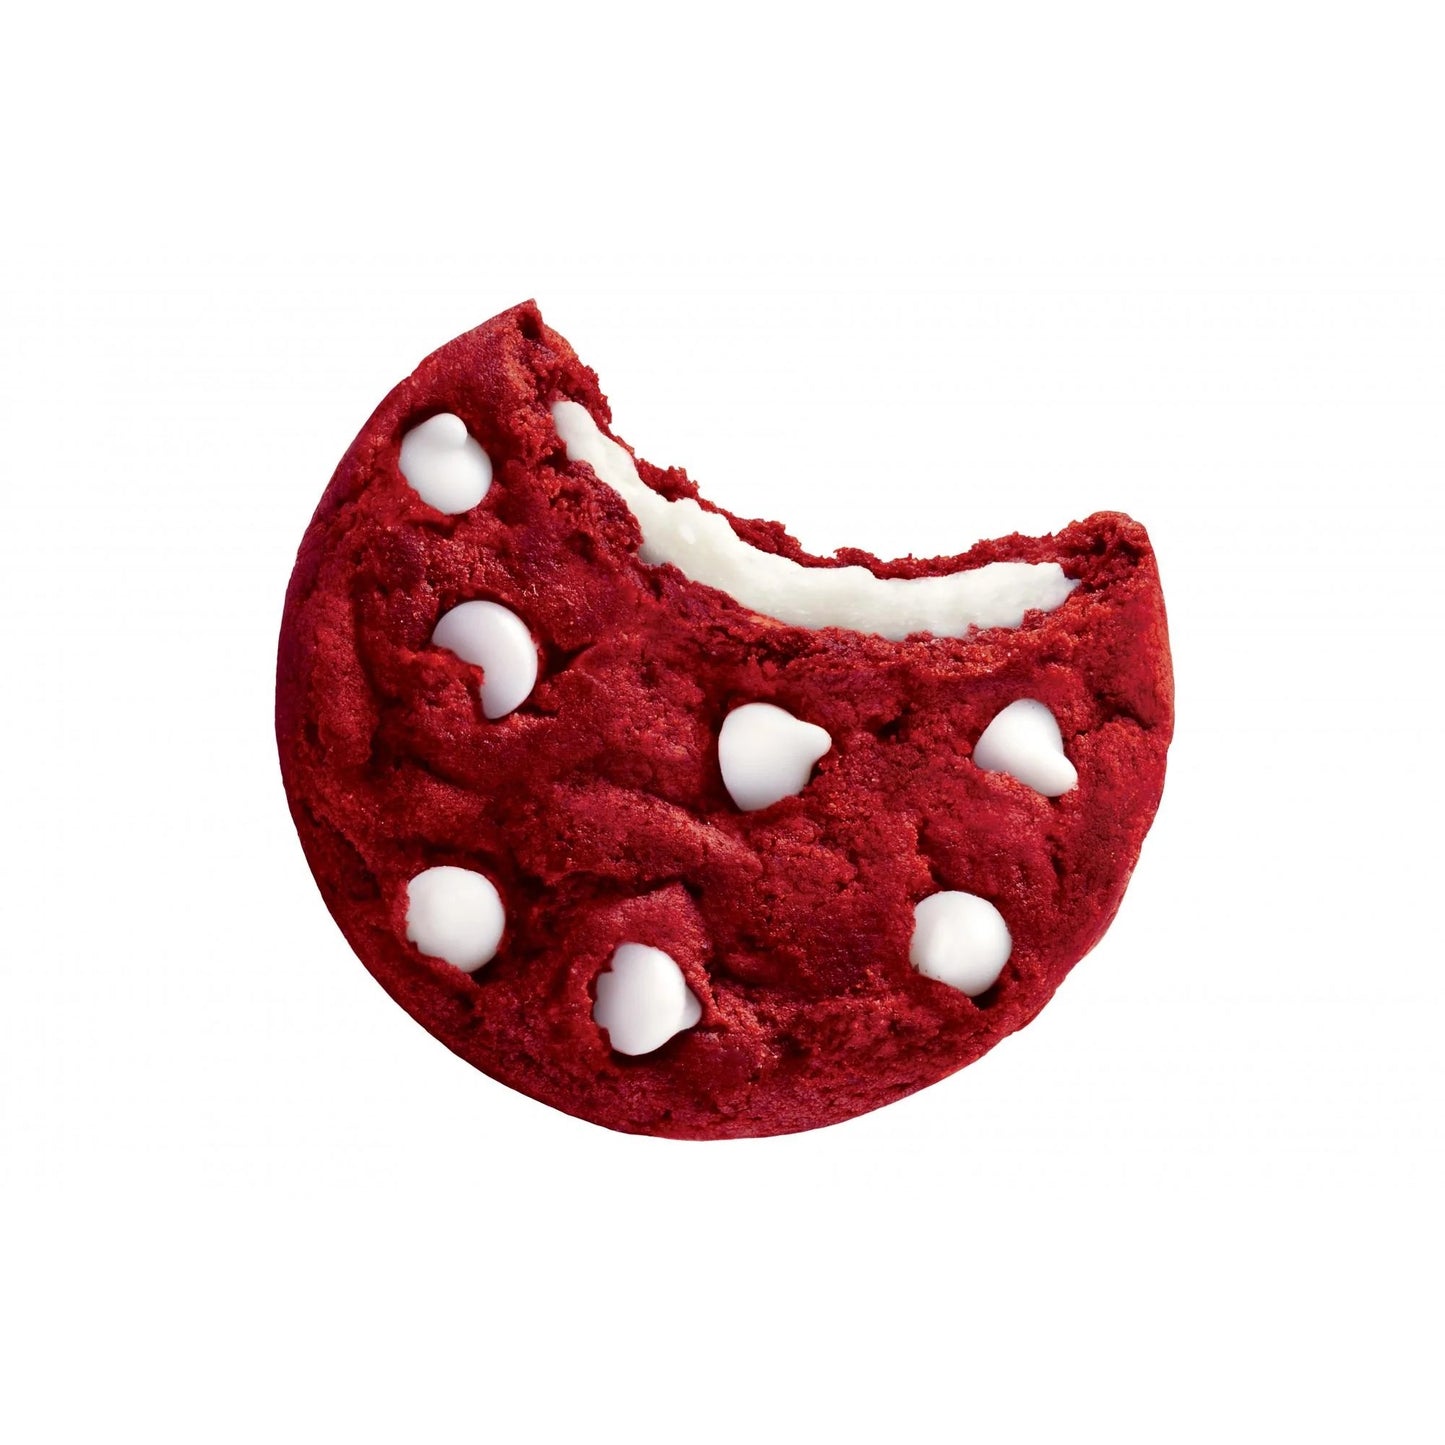 Chips Ahoy! Chewy Red Velvet